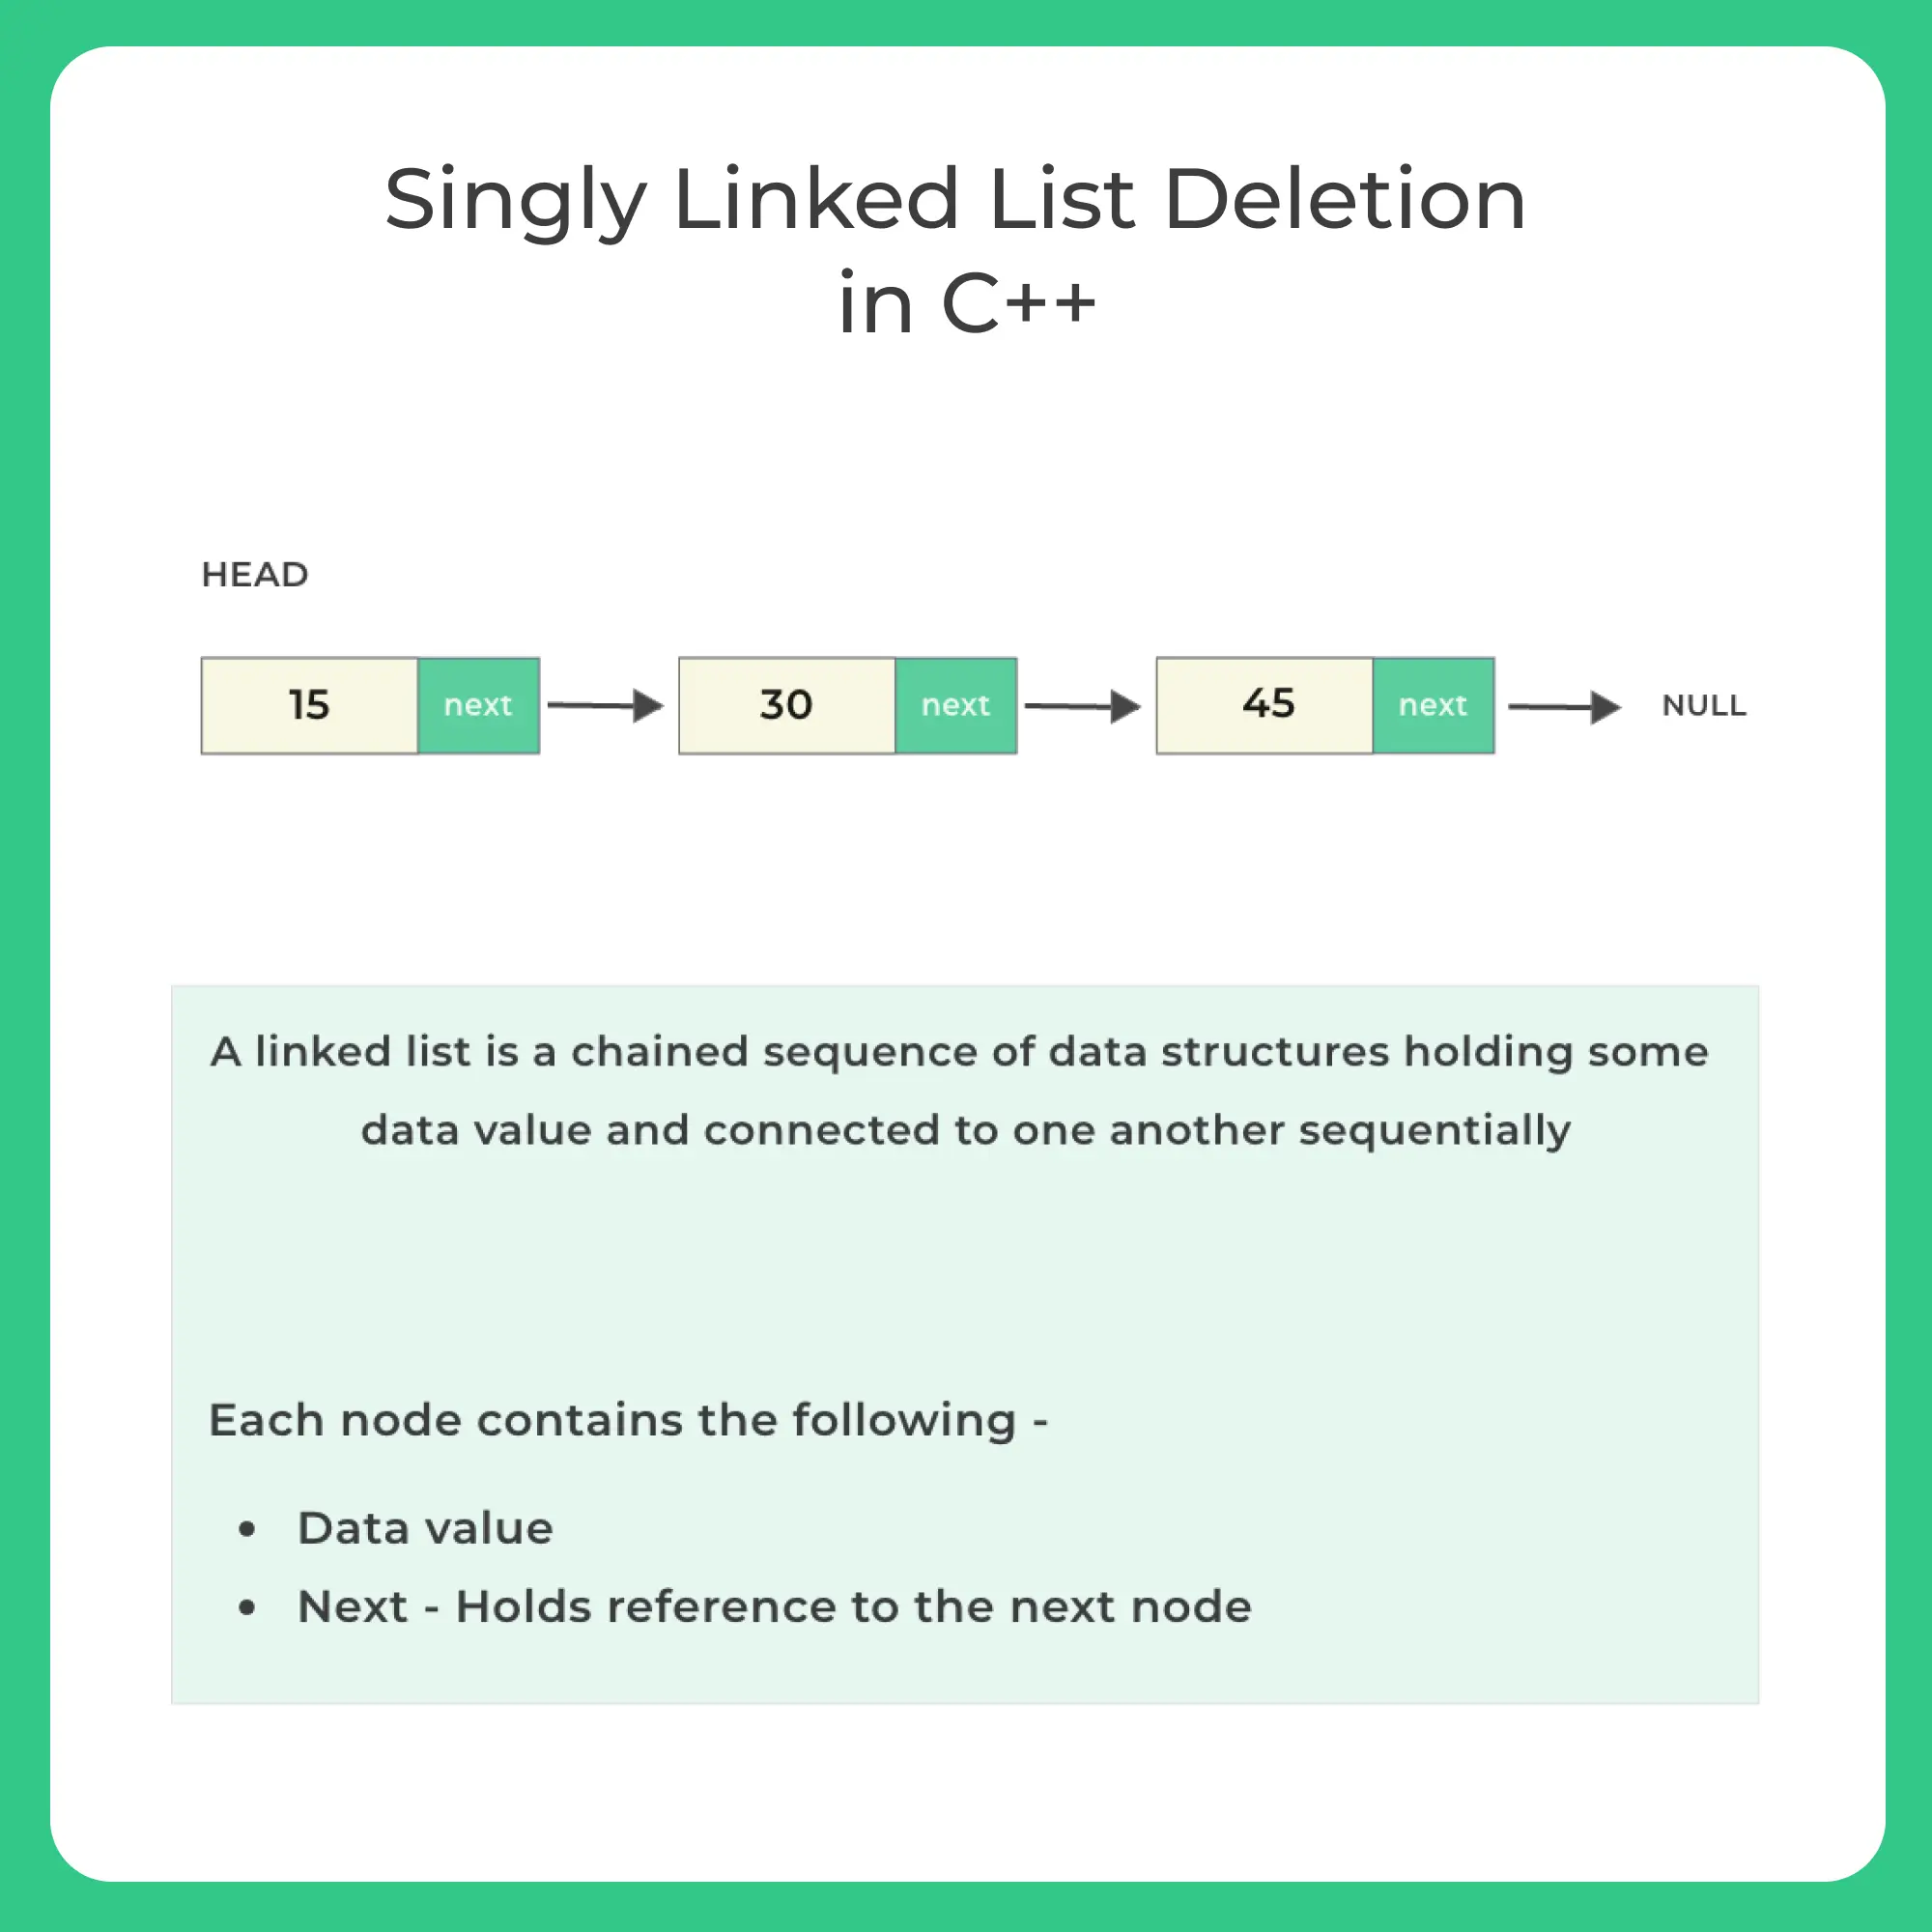 Singly linked list deletion in C++